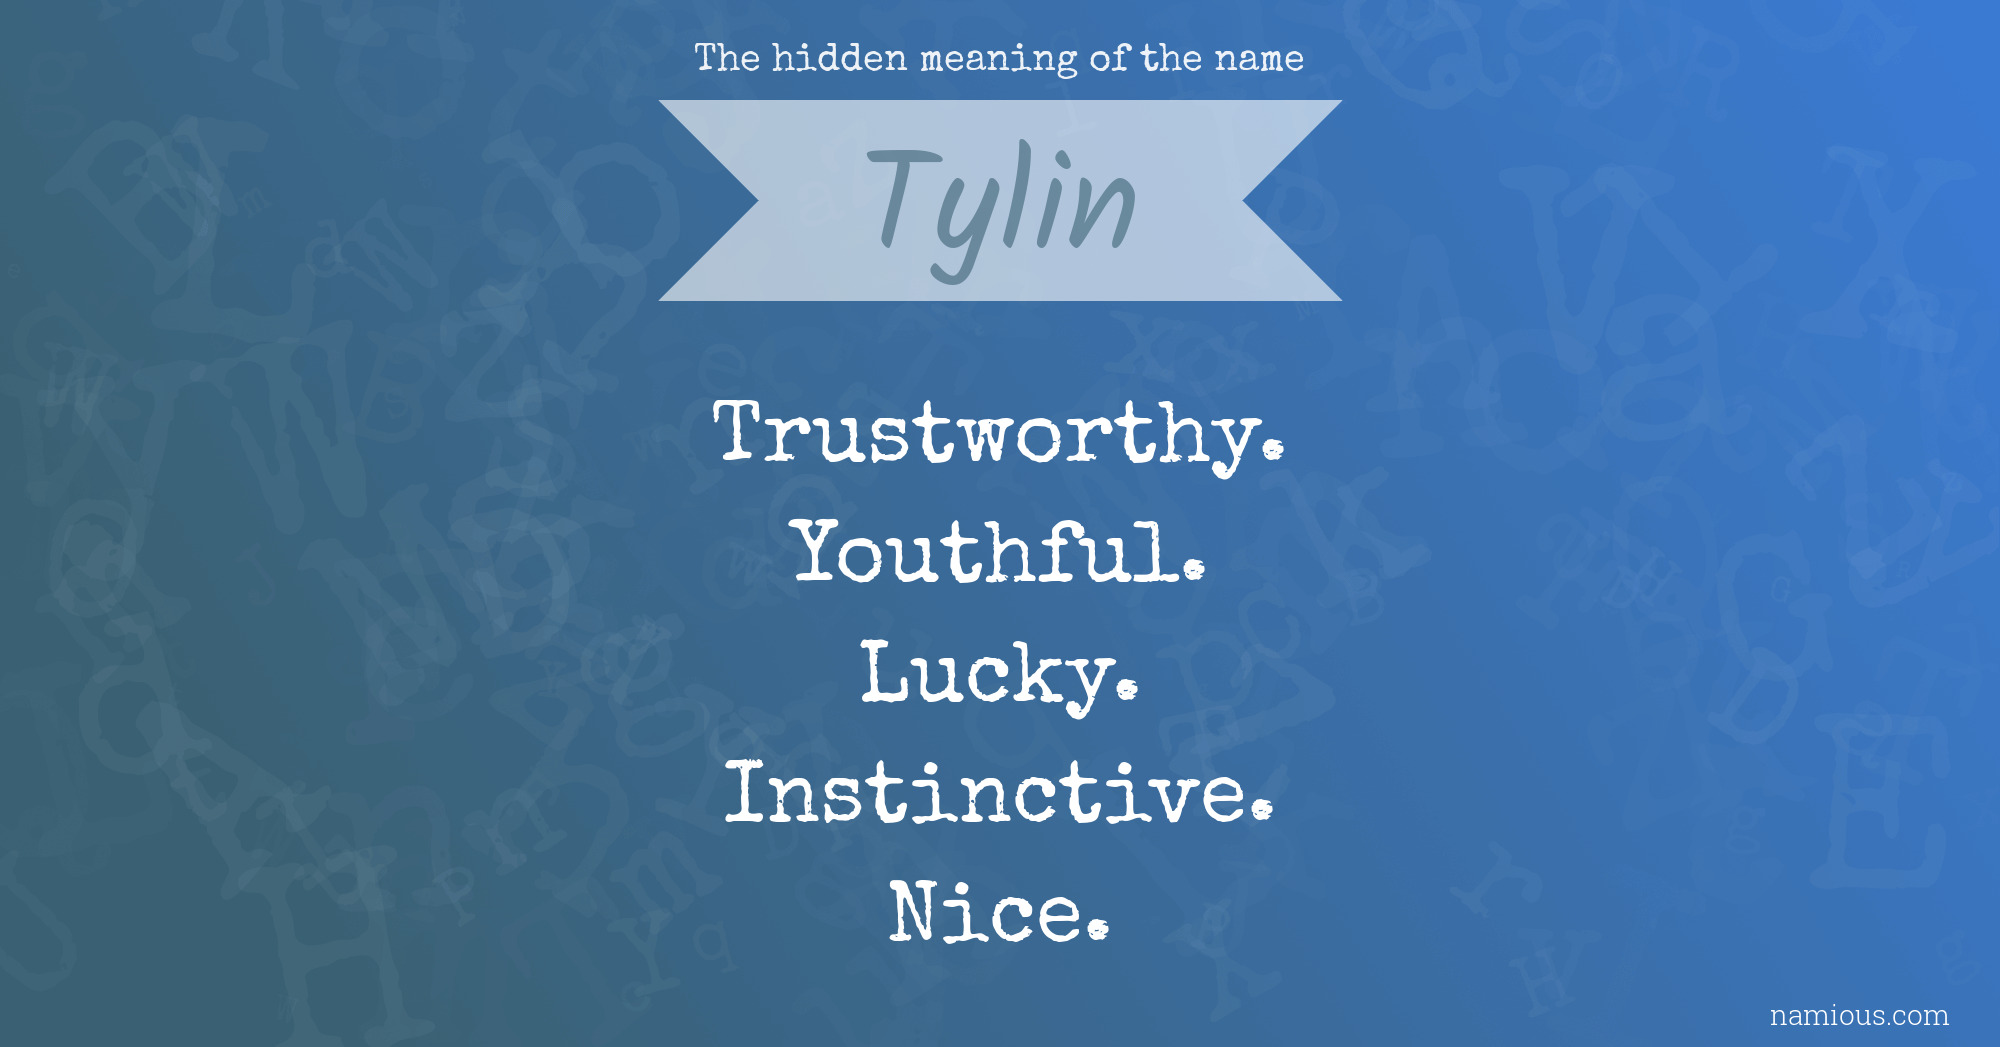 The hidden meaning of the name Tylin